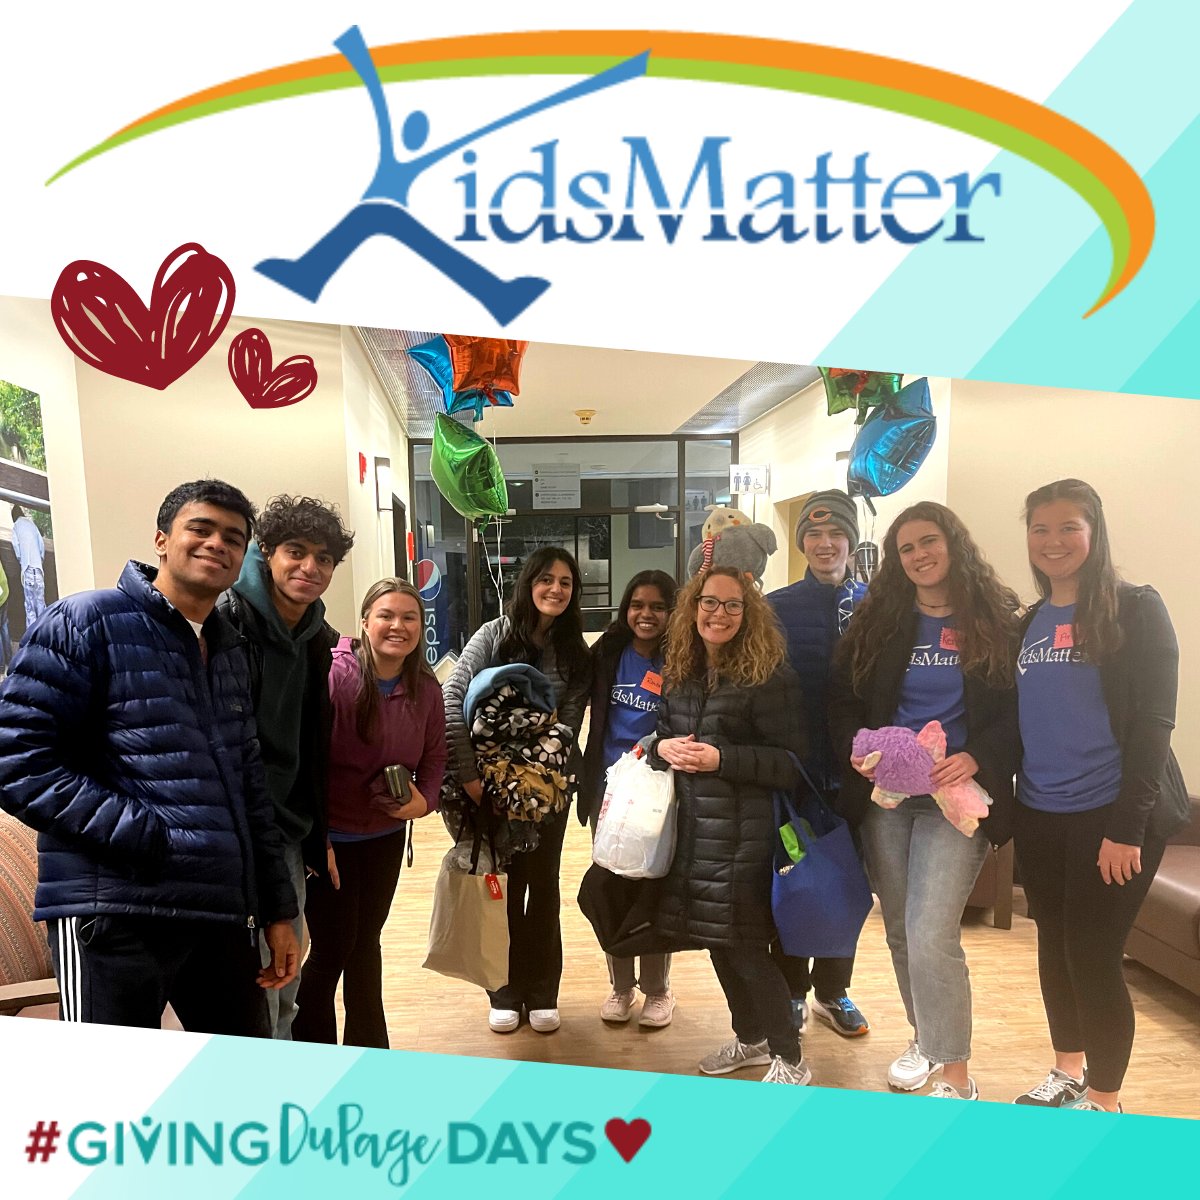 Donations have opened at Giving DuPage Days! You can even start your own fundraiser to benefit our mission. 

Learn More and Donate: givingdupageday.org/organizations/…

#GivingDuPageDays #KidsMatter #YouthMentalHealth #Education #EmpoweringYouth @GivingDuPage